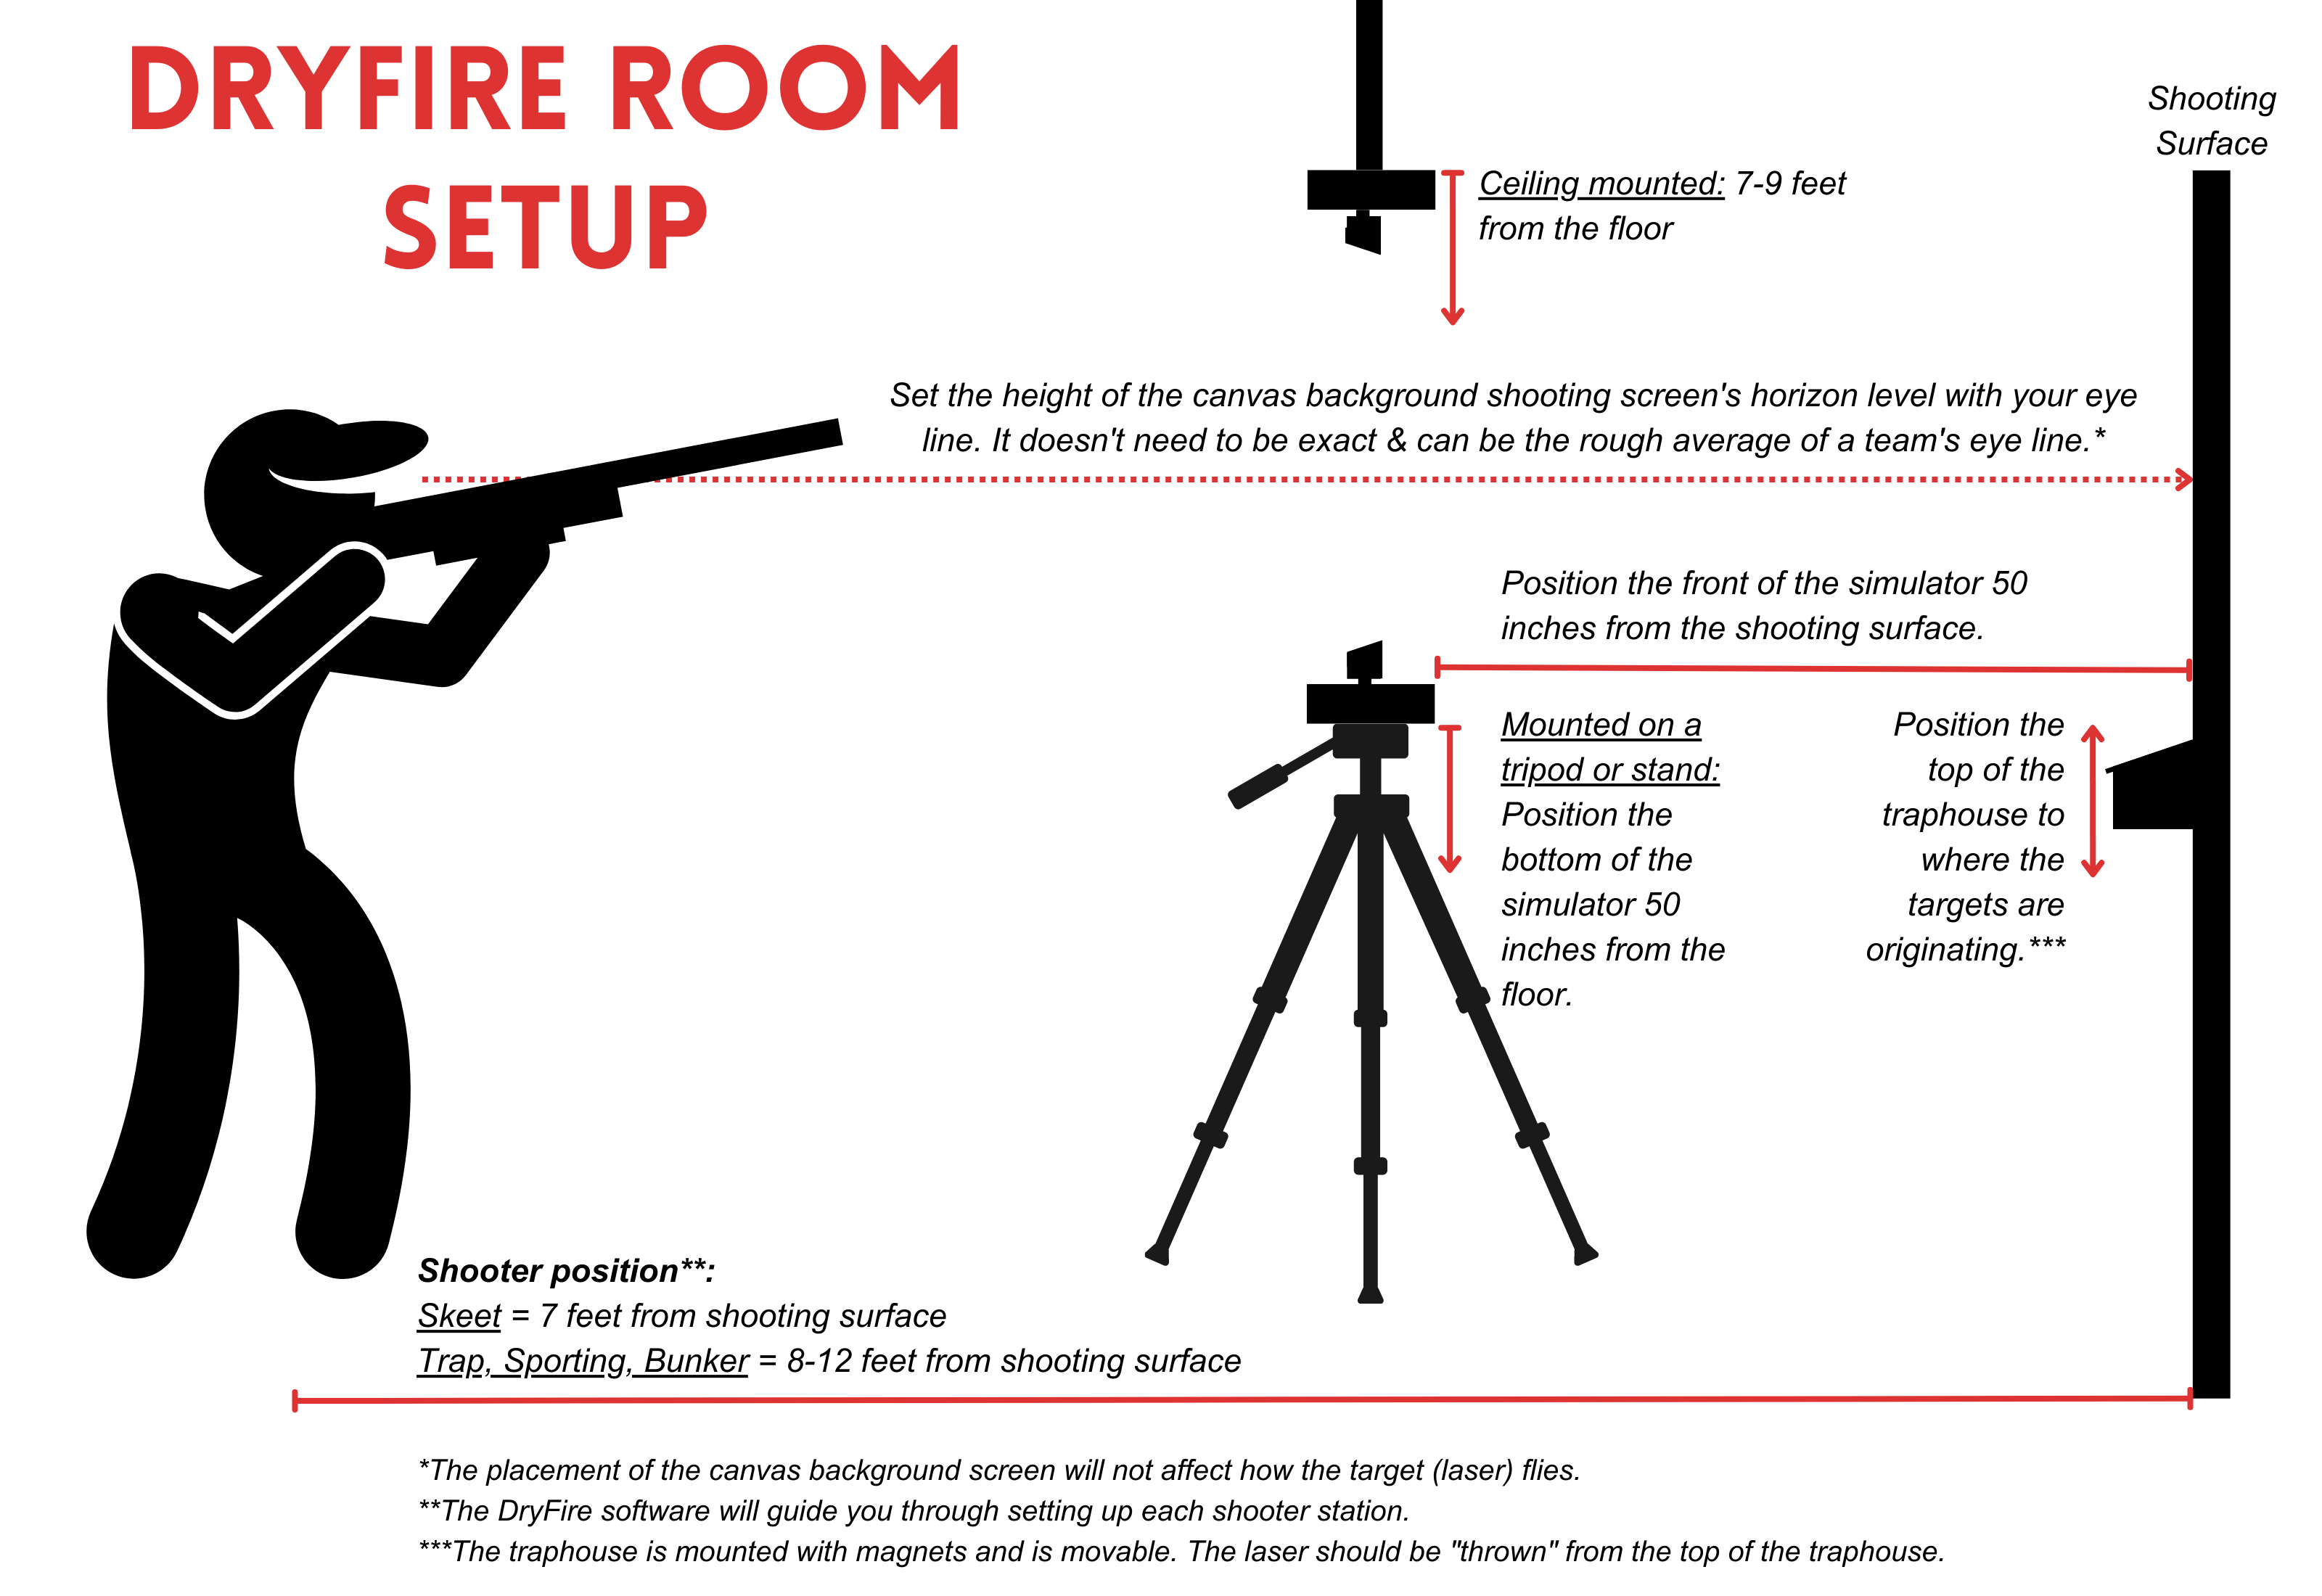 DryFire USA Room Setup - Simulator position and distance from the wall and from the floor